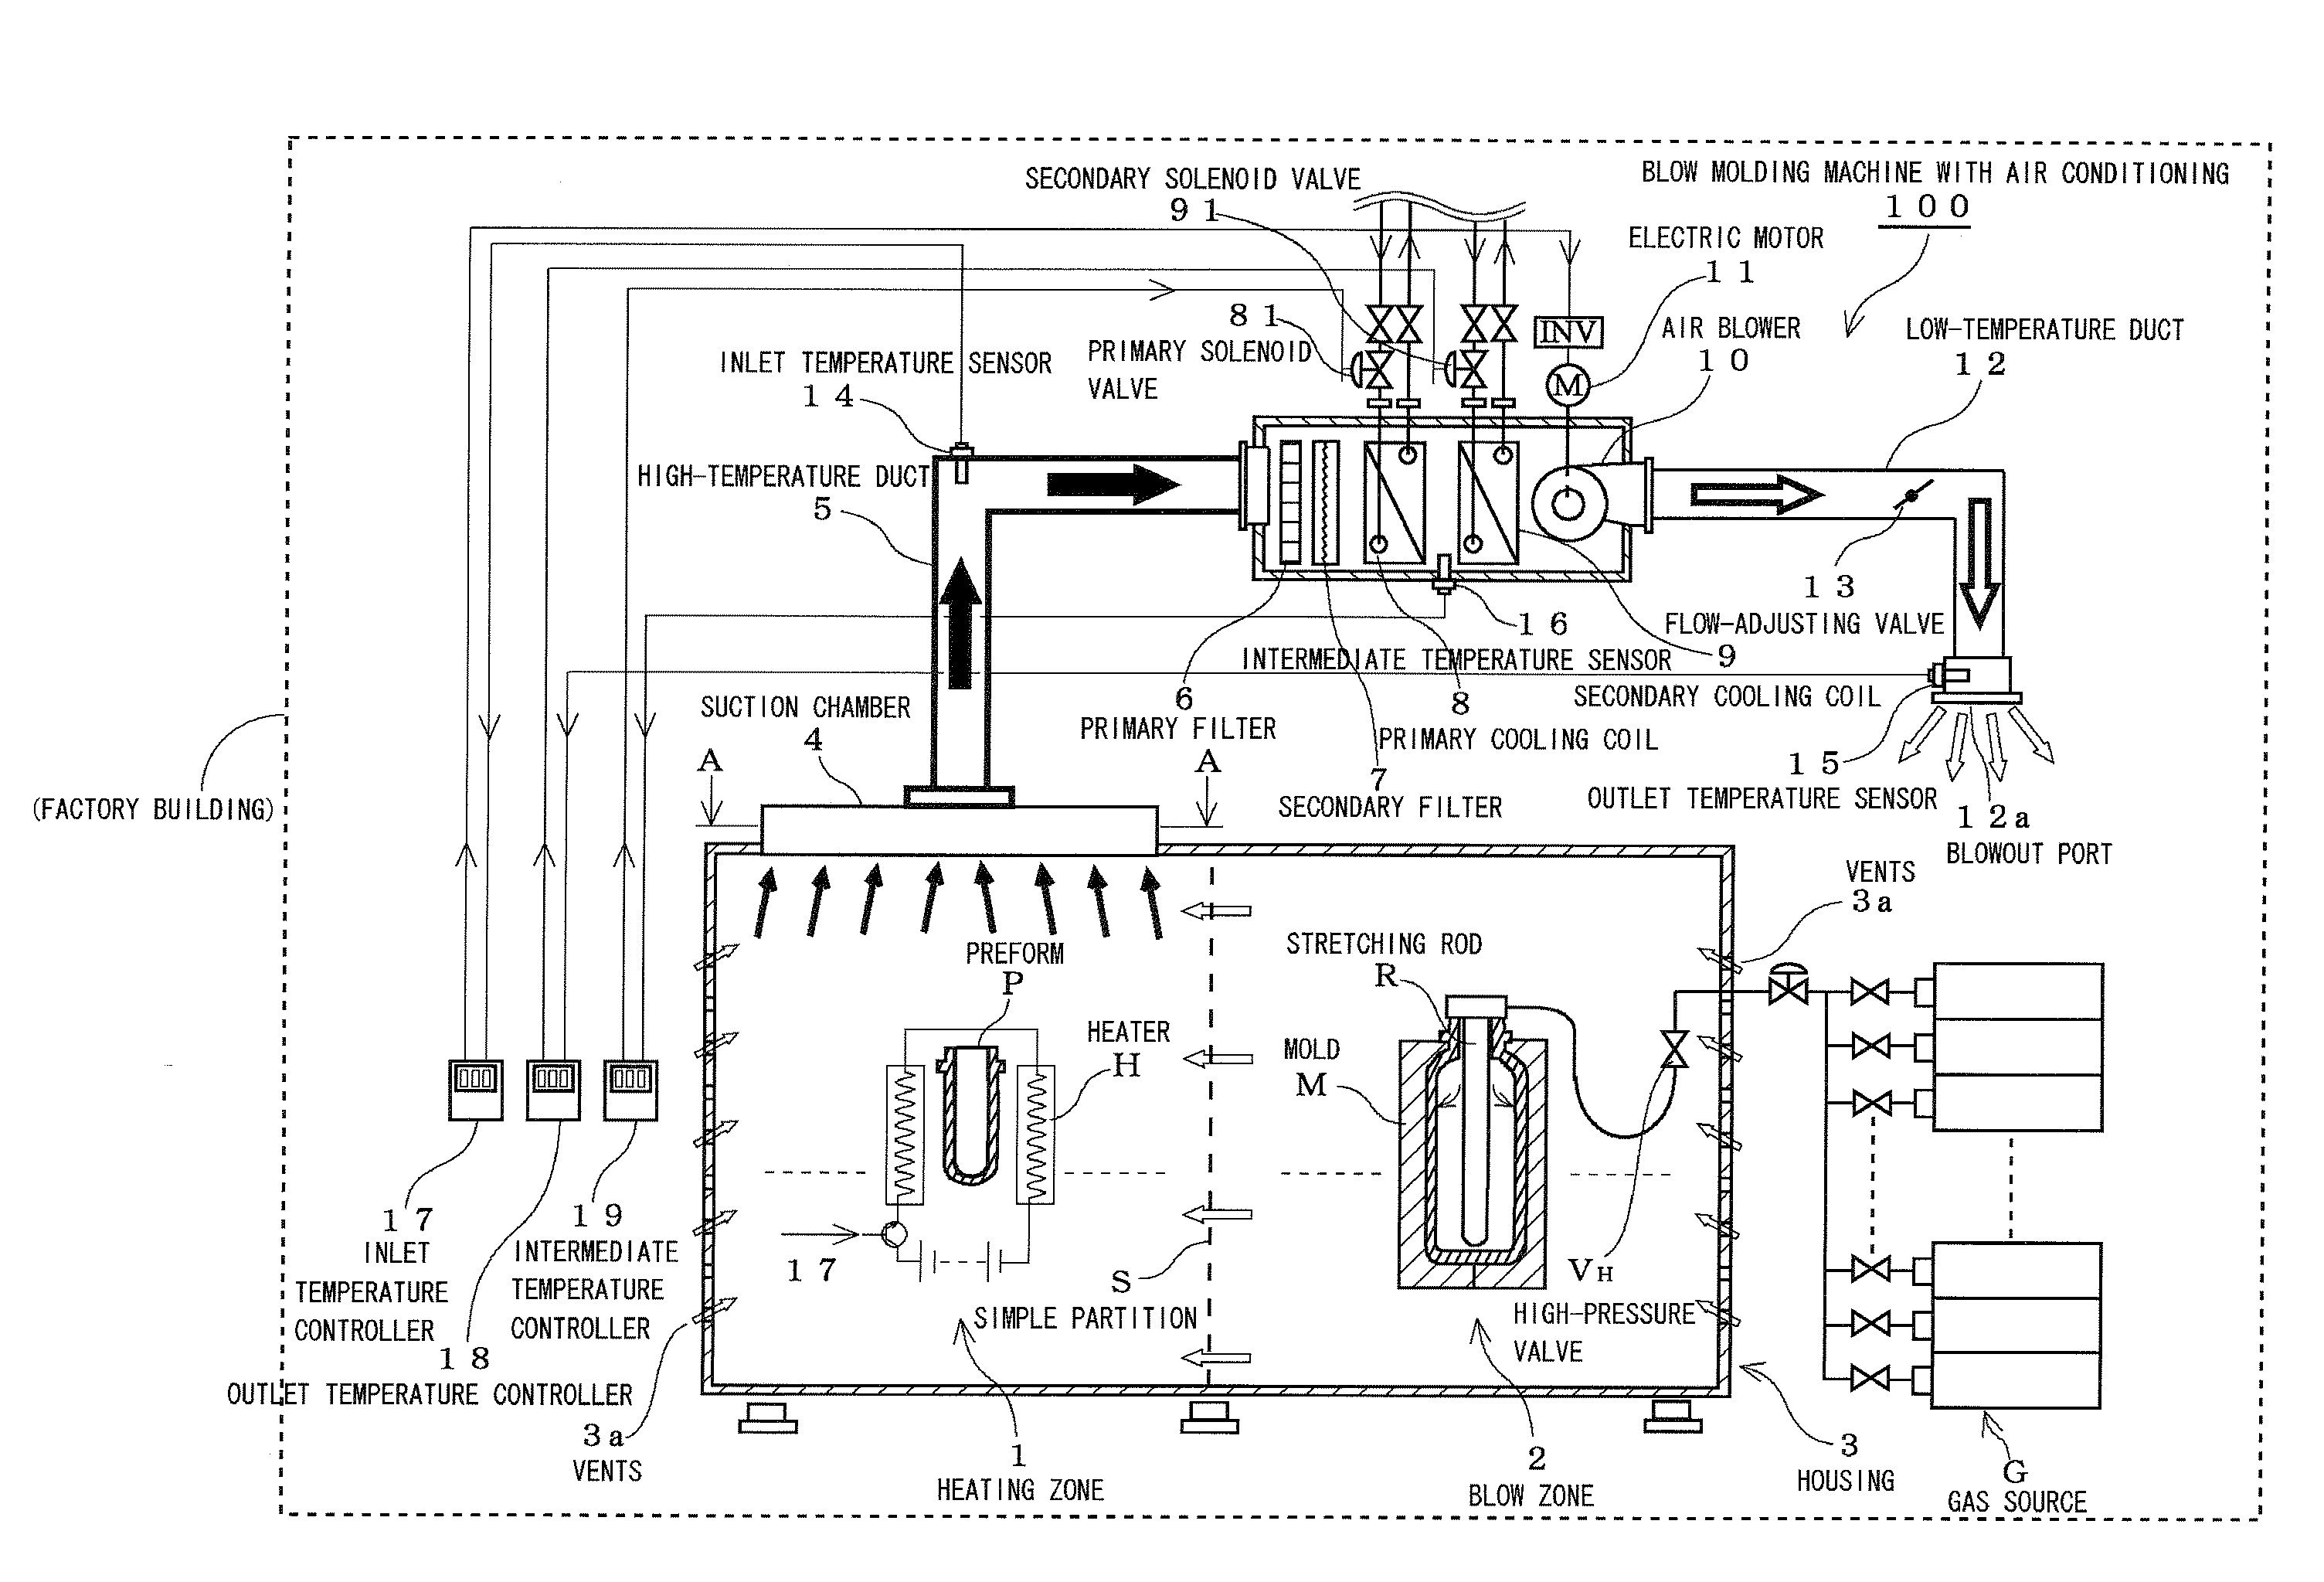 Blow molding machine with air conditioning